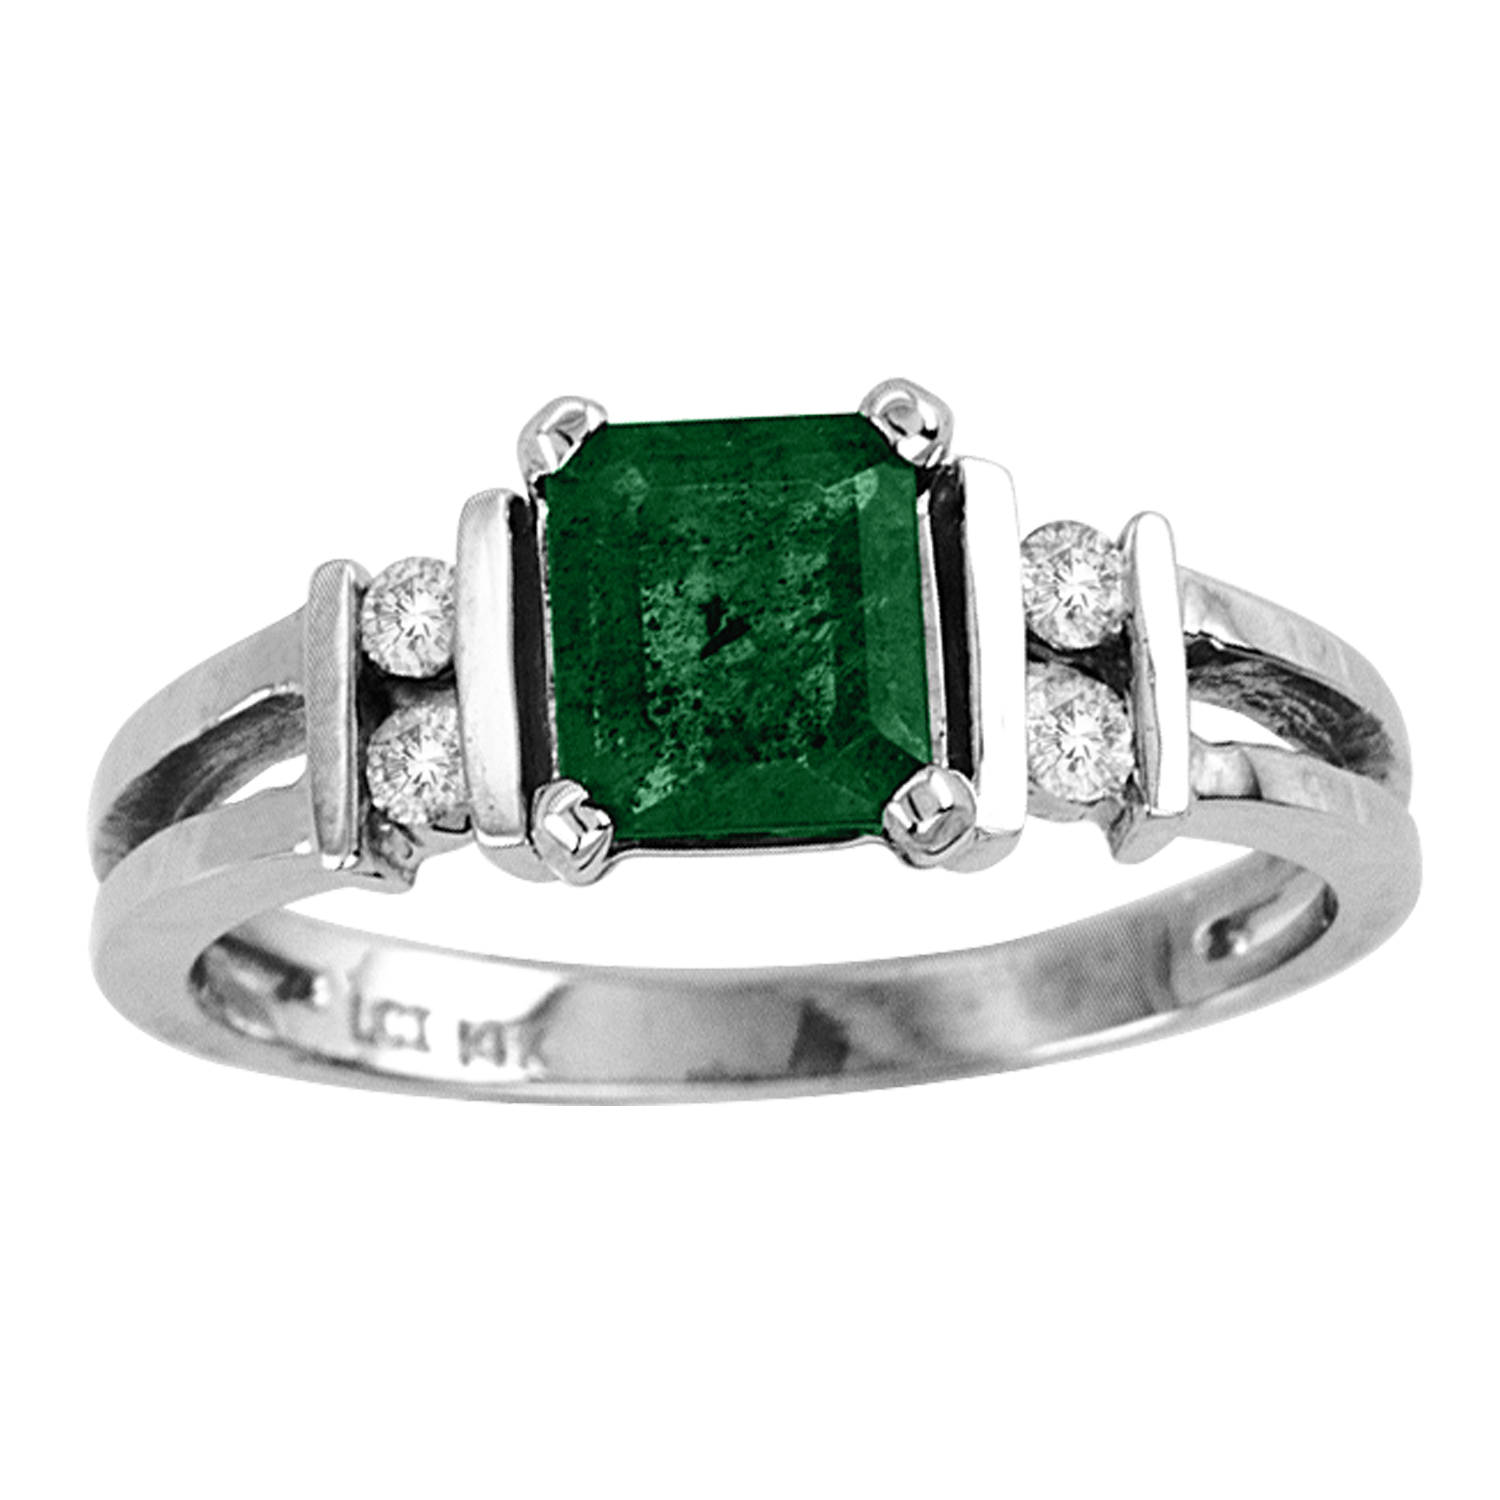 1.00cttw Diamond and Emerald Ring set in 14k Gold